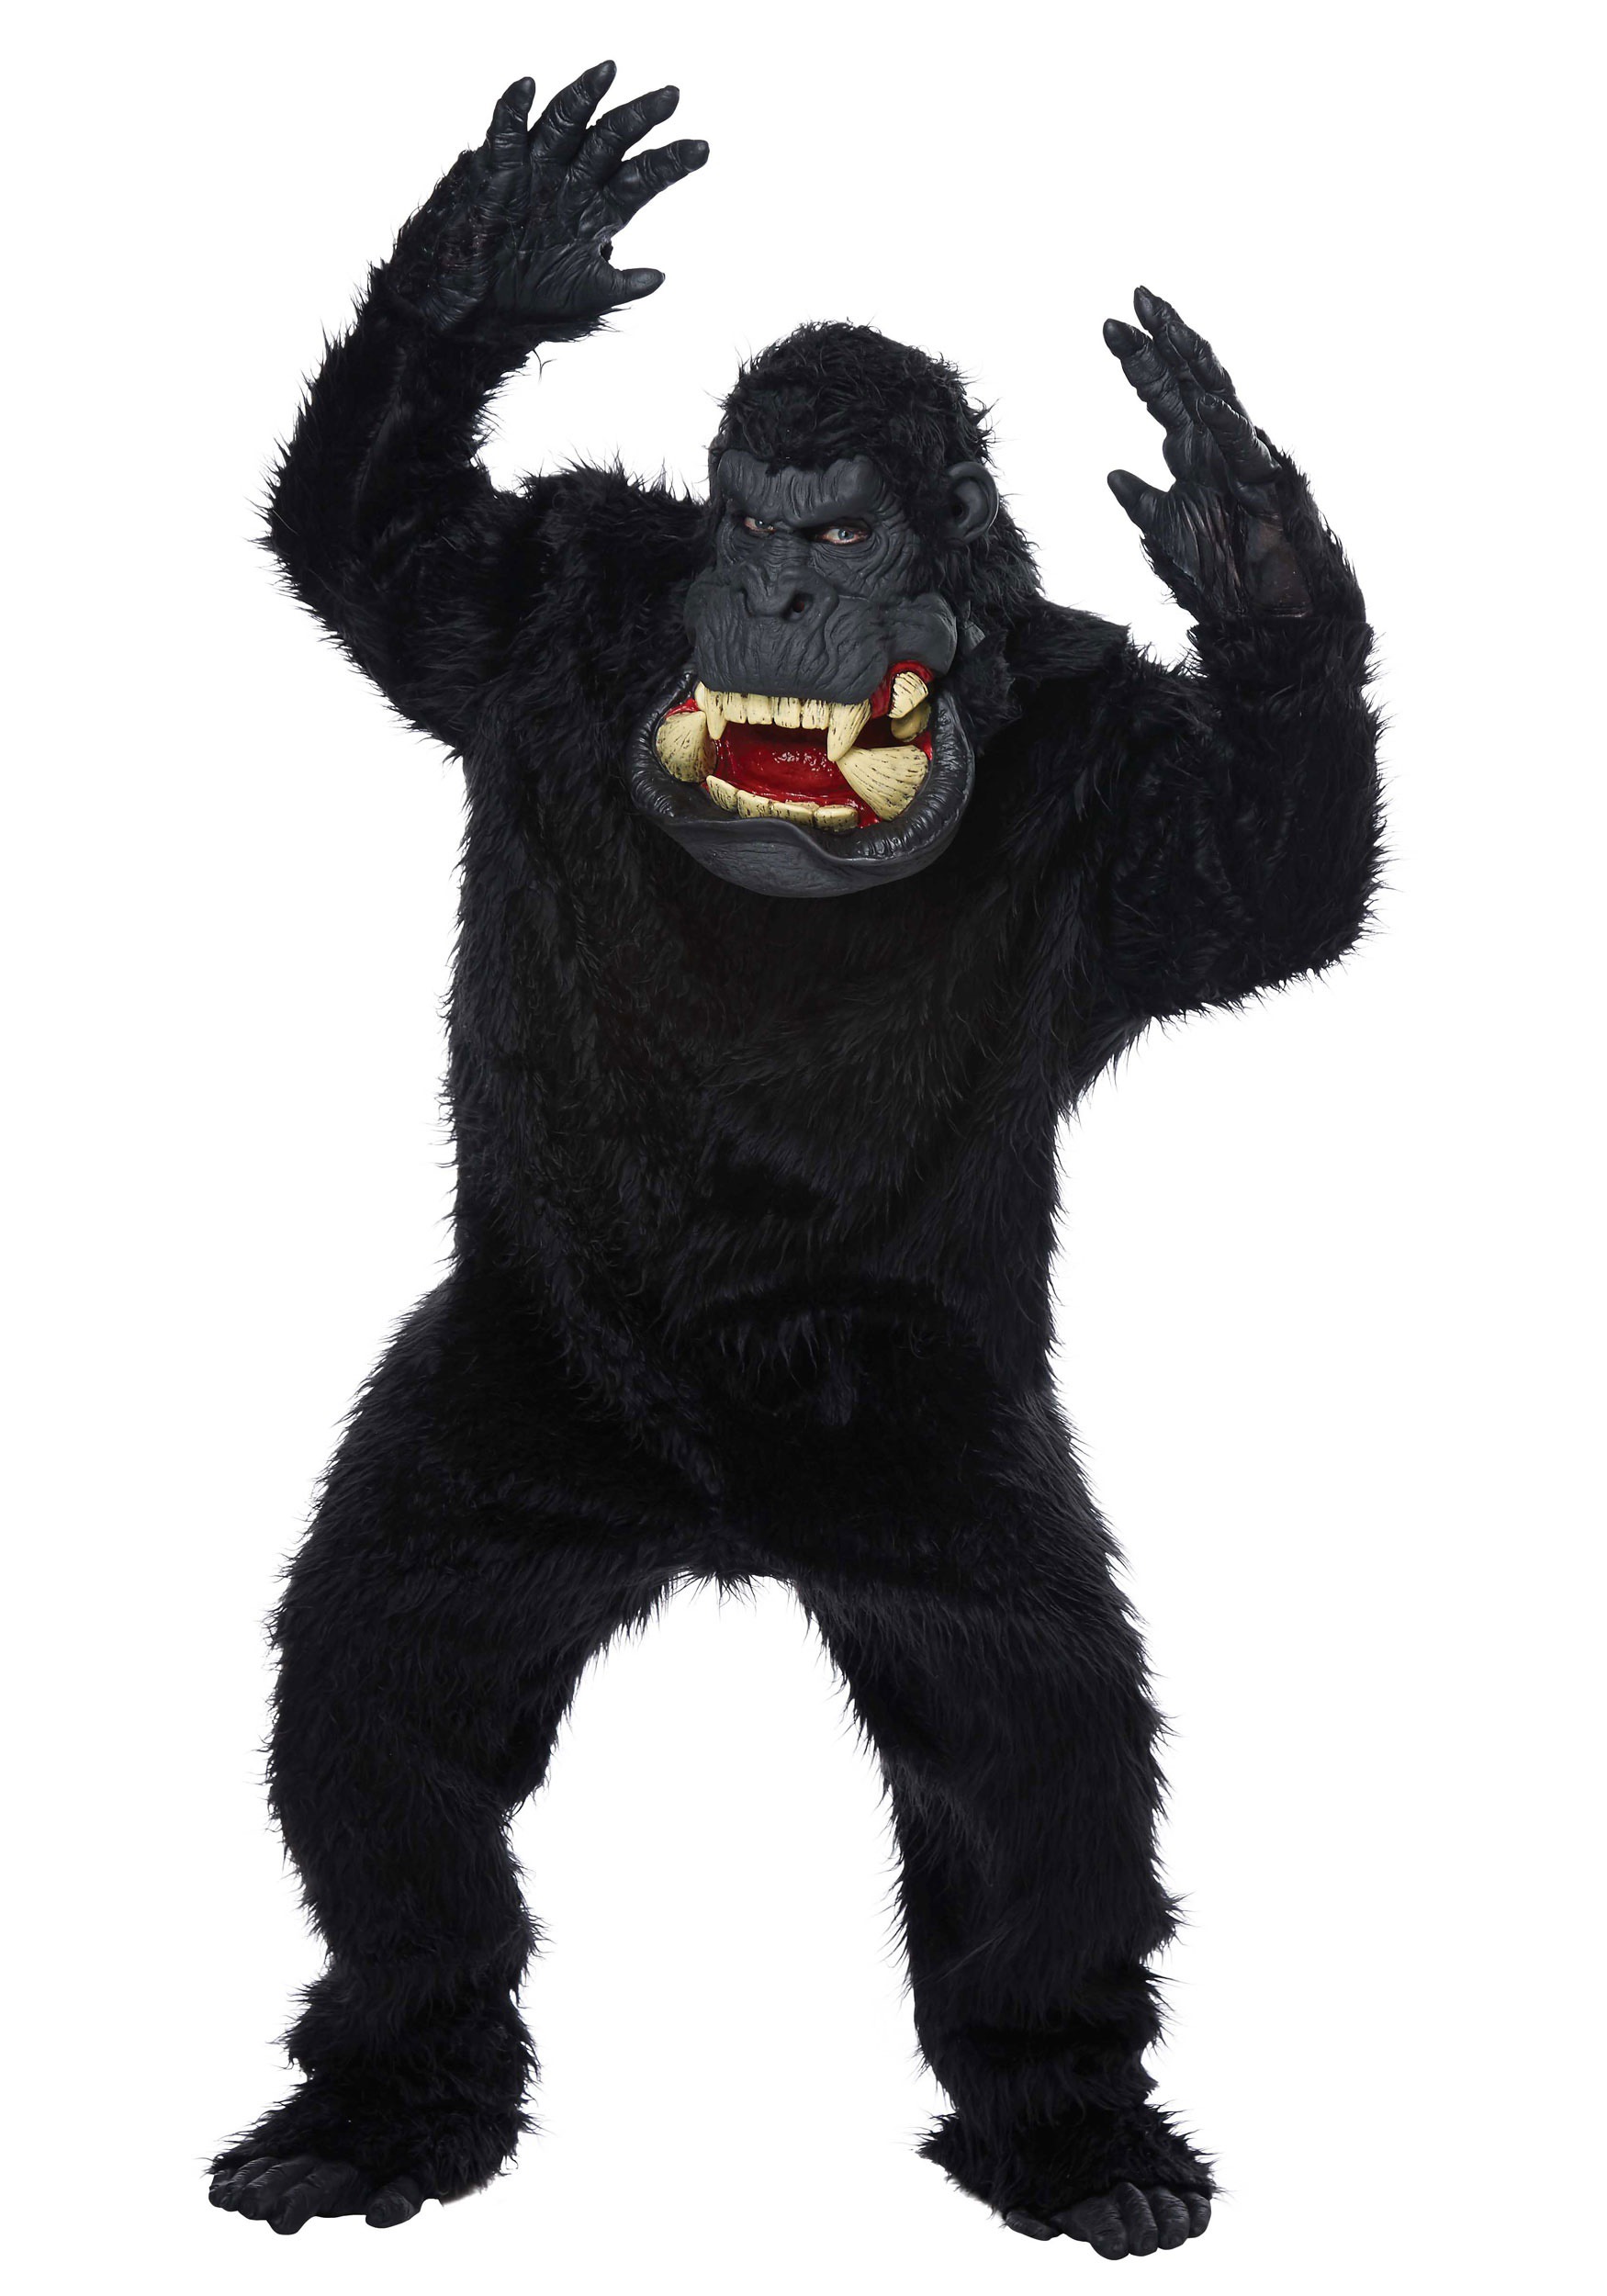 Goin' Bananas! Gorilla Costume for Adults